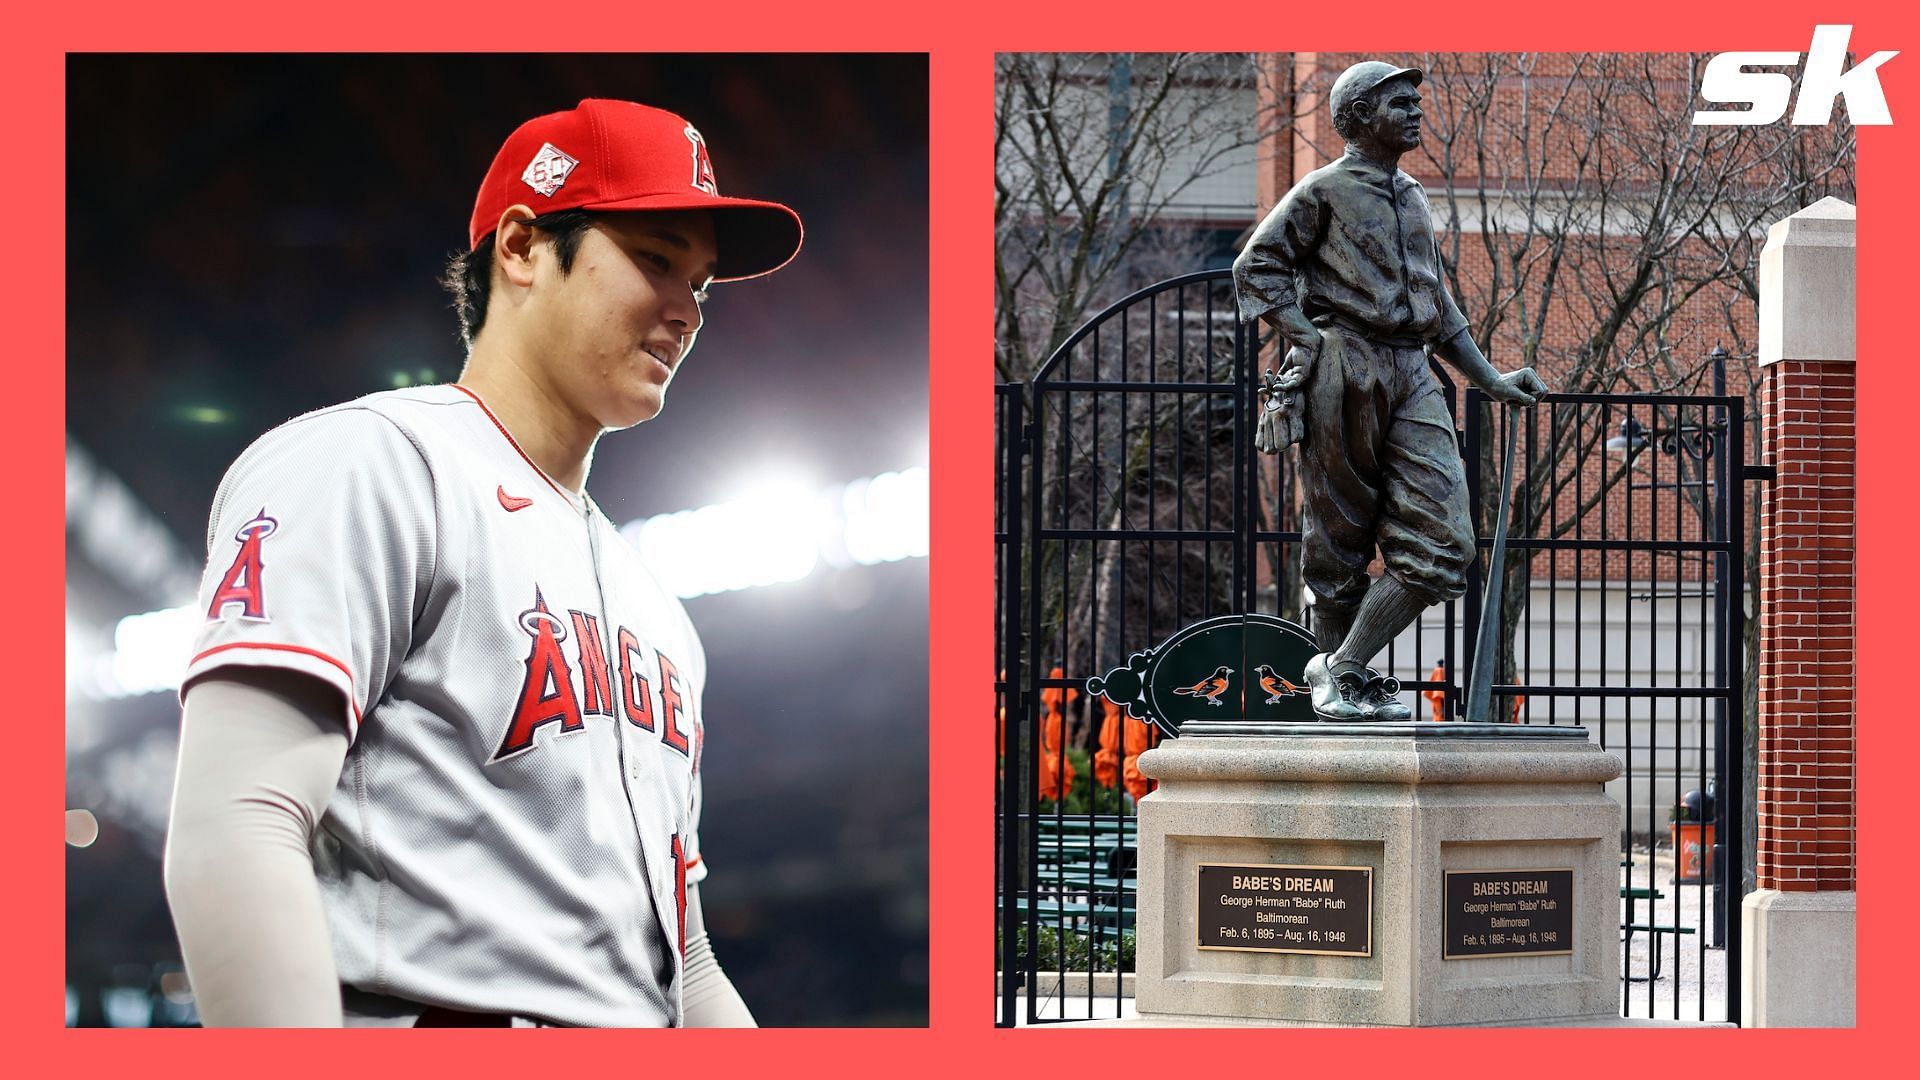 Shohei Ohtani of the LA Angels and Babe Ruth of the NY Yankees